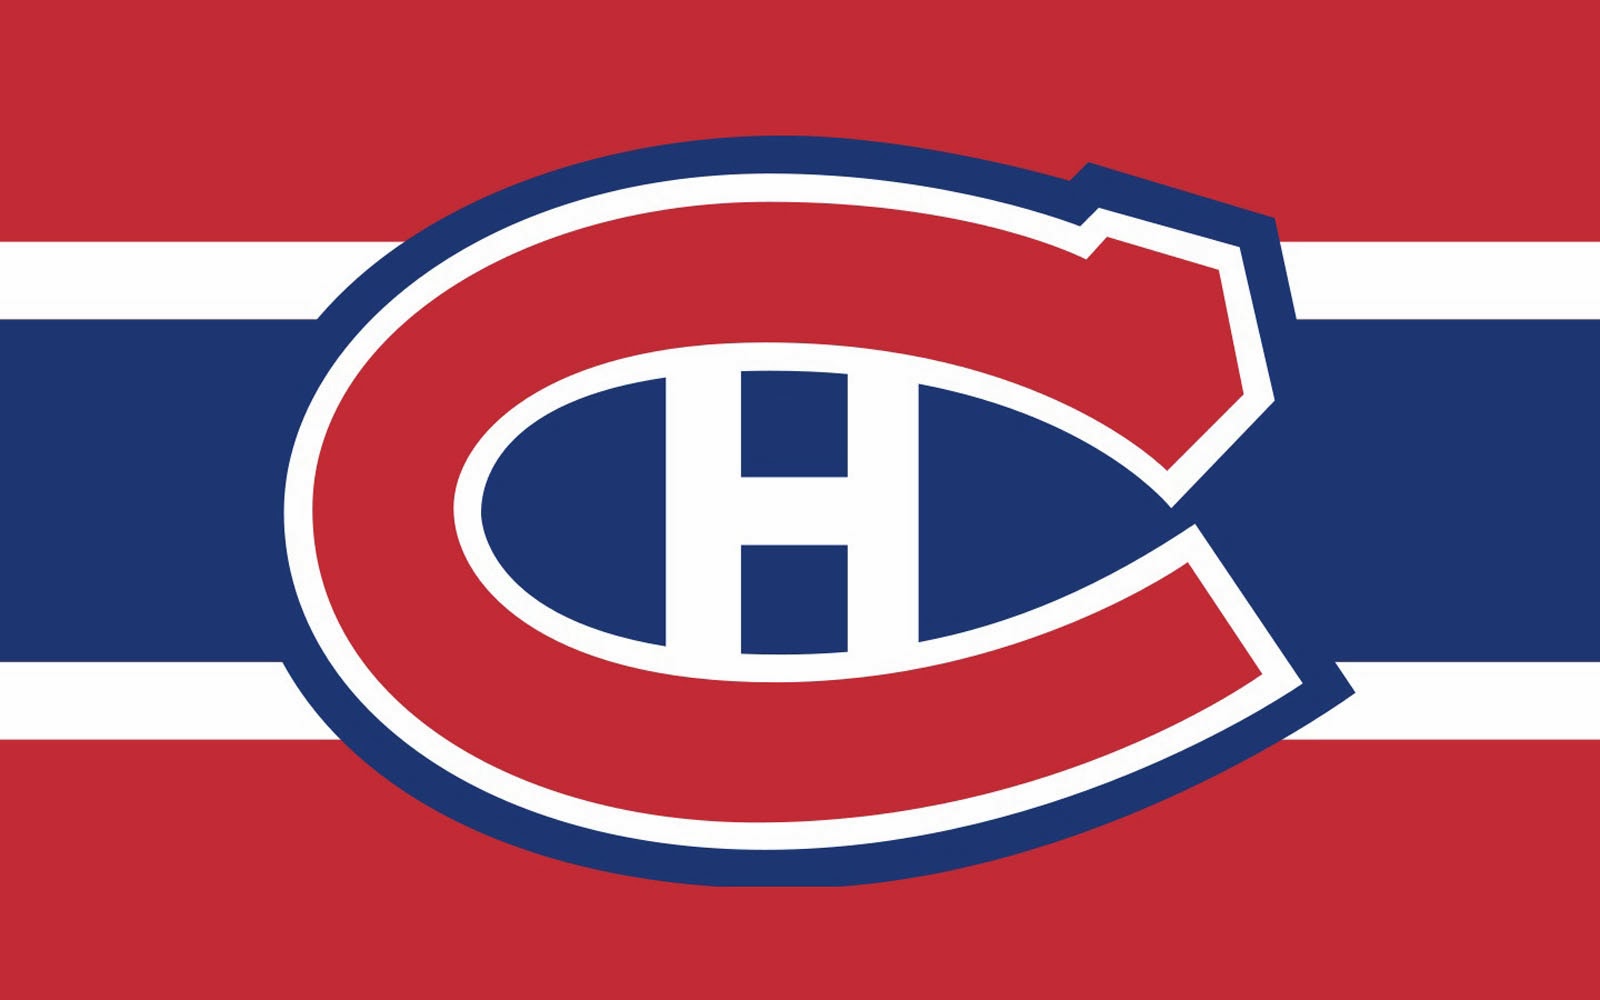 The Montreal Canadiens Wallpaper In Category Of Sports